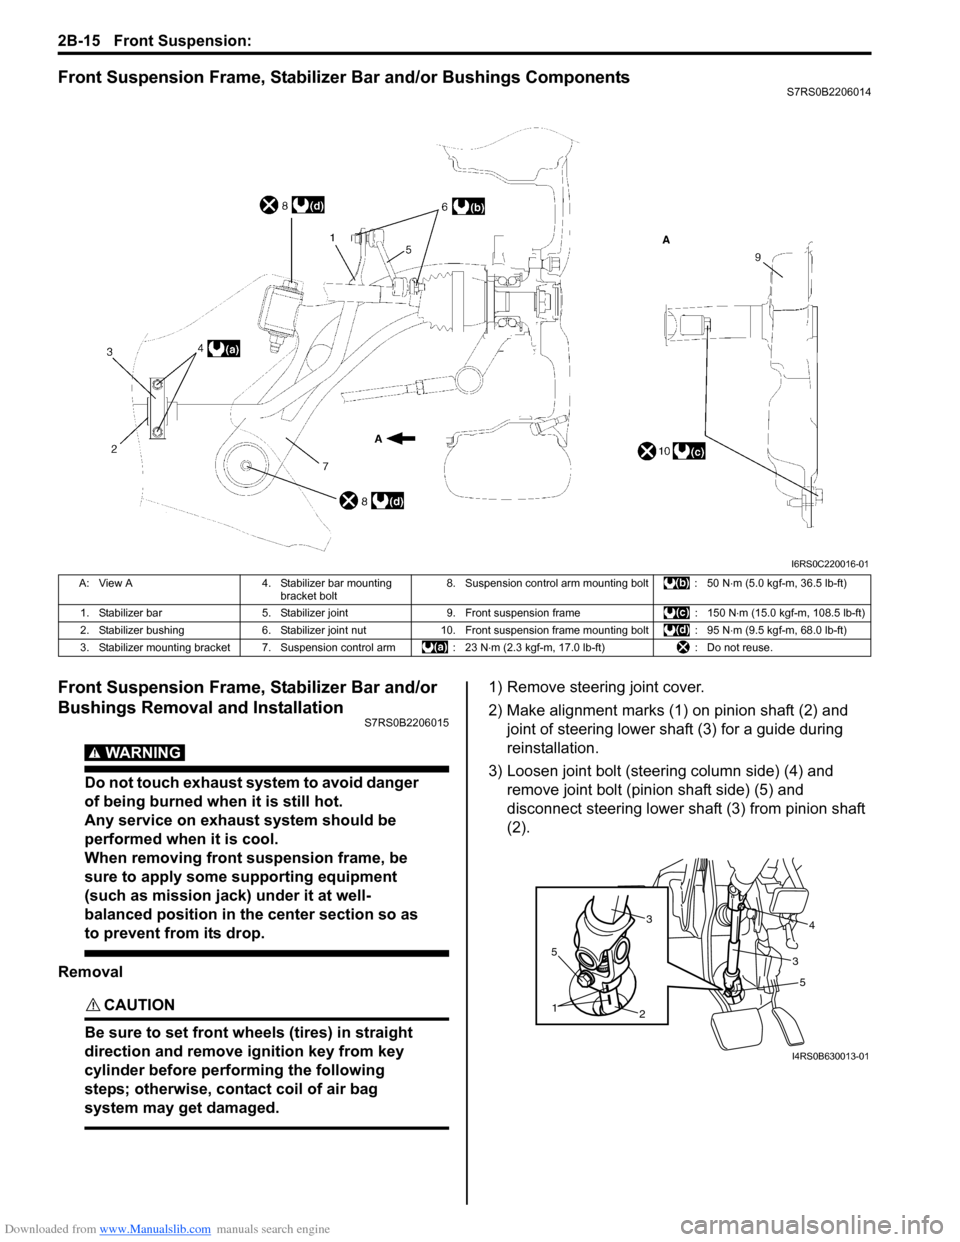 SUZUKI SWIFT 2006 2.G Service Workshop Manual Downloaded from www.Manualslib.com manuals search engine 2B-15 Front Suspension: 
Front Suspension Frame, Stabilizer Bar and/or Bushings ComponentsS7RS0B2206014
Front Suspension Frame, Stabilizer Bar 